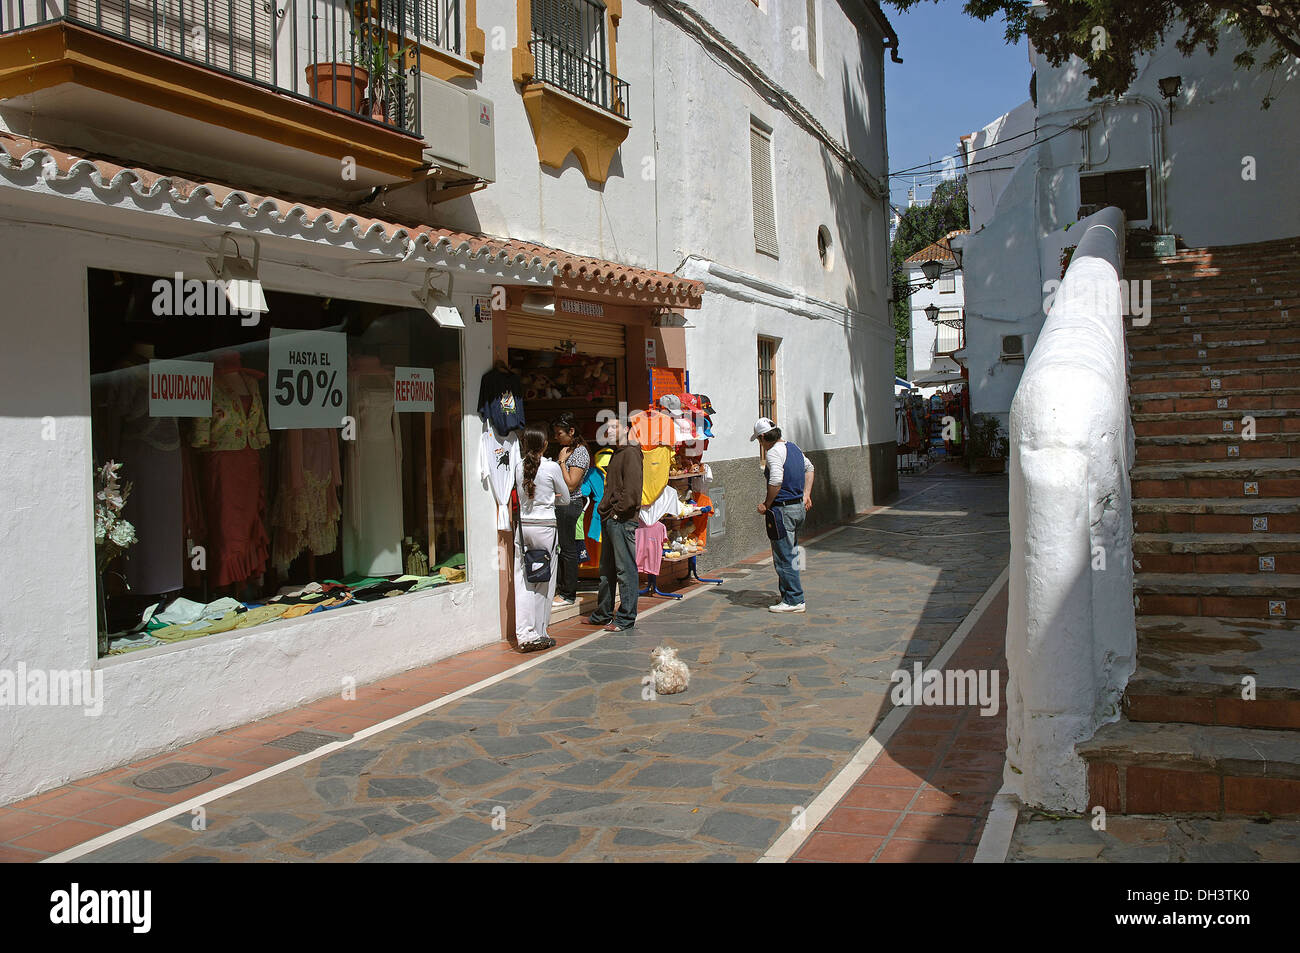 Urban view, Old town, Marbella, Malaga-province, Region of Andalusia, Spain, Europe Stock Photo